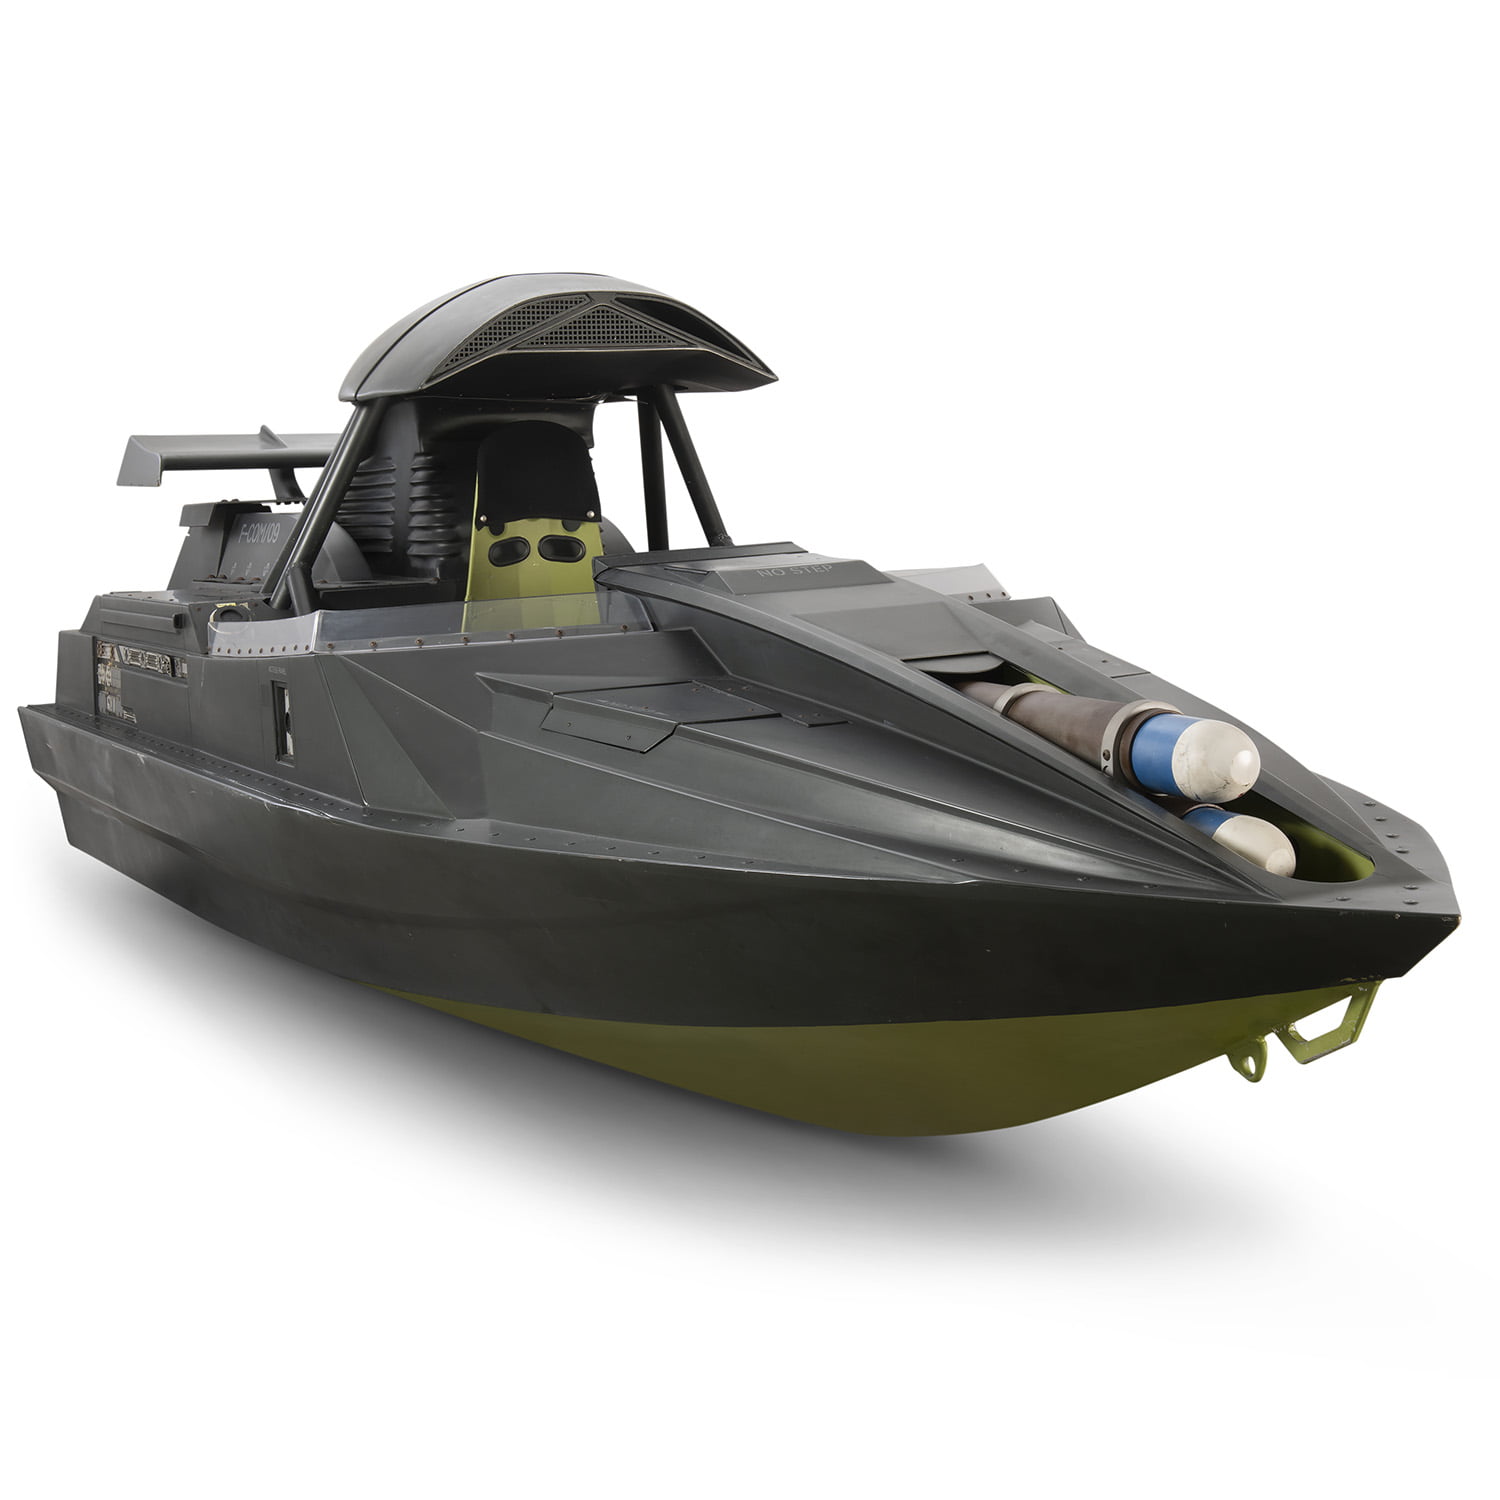 THE WORLD IS NOT ENOUGH (1999) Q JET BOAT